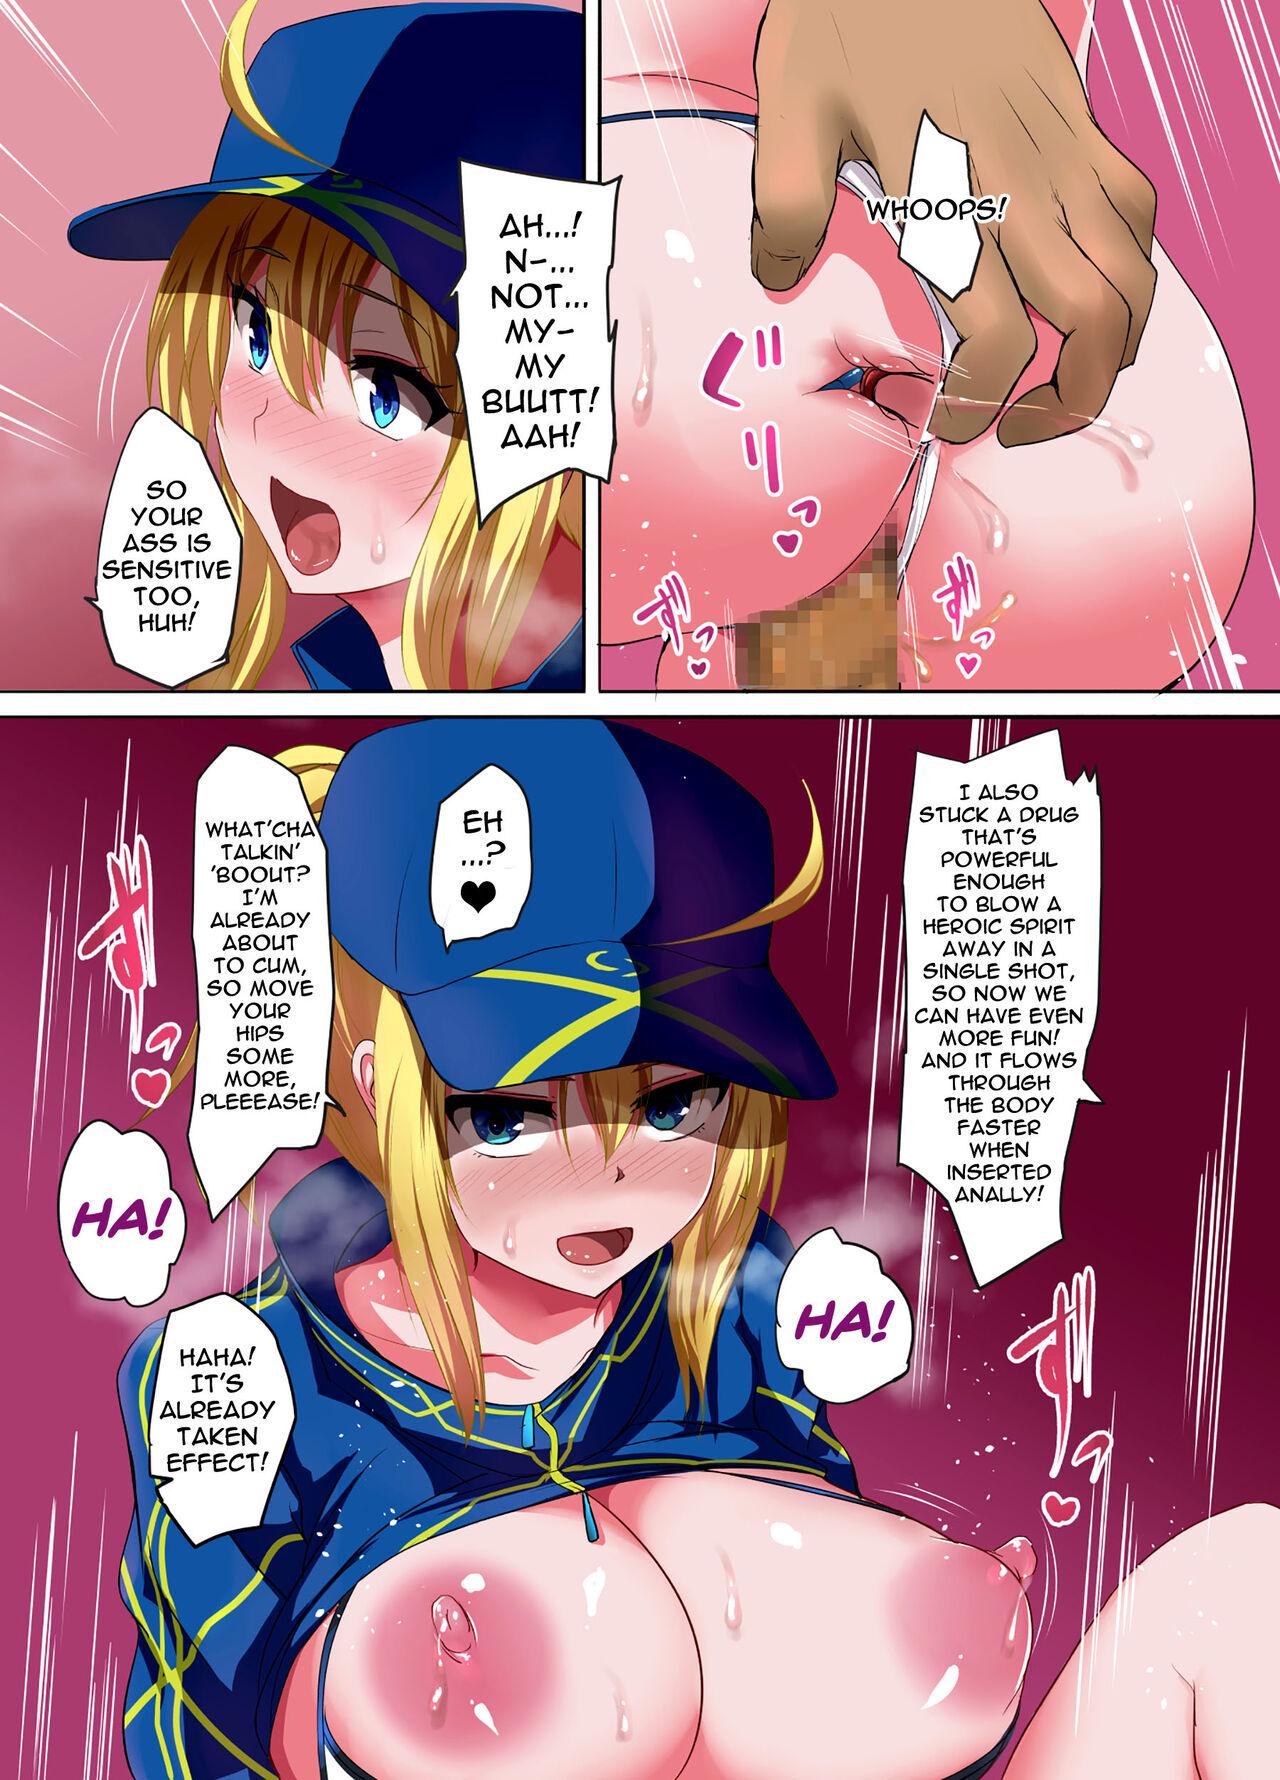 Making Mysterious Heroine X Give Me An Ahegao With Hypno 13